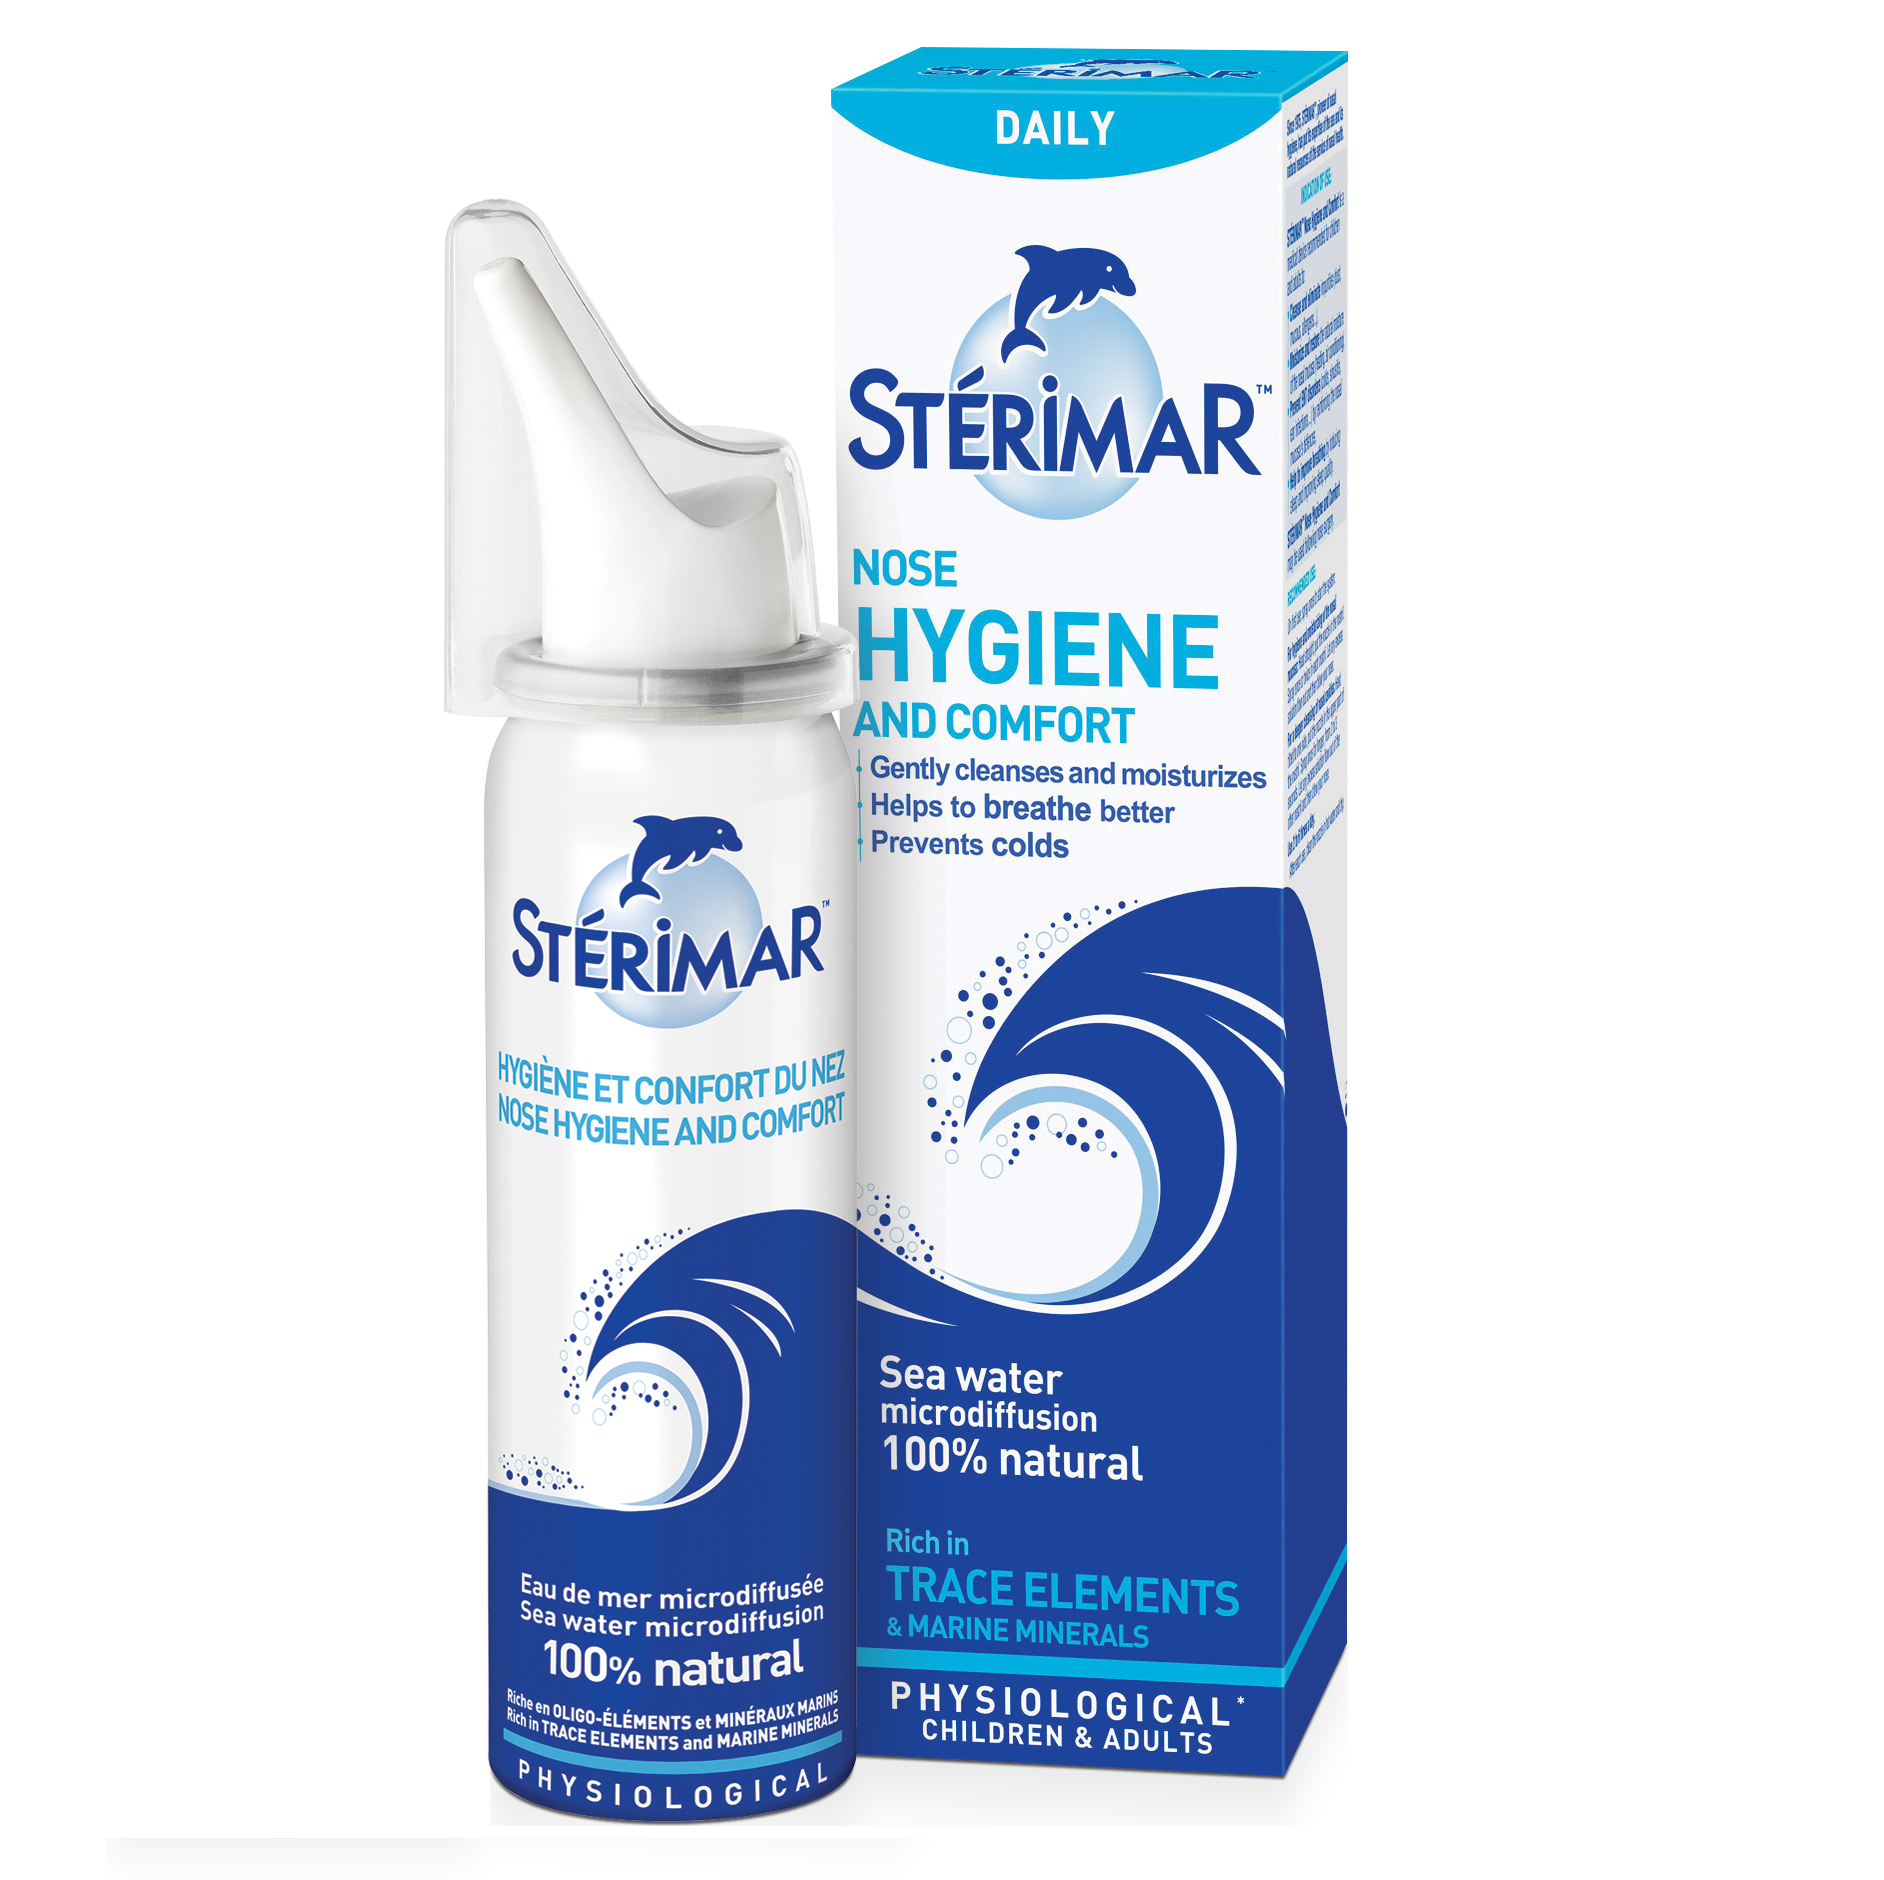 STERIMAR NOSE HYGIENE AND COMFORT Dung dịch xịt vệ sinh mũi